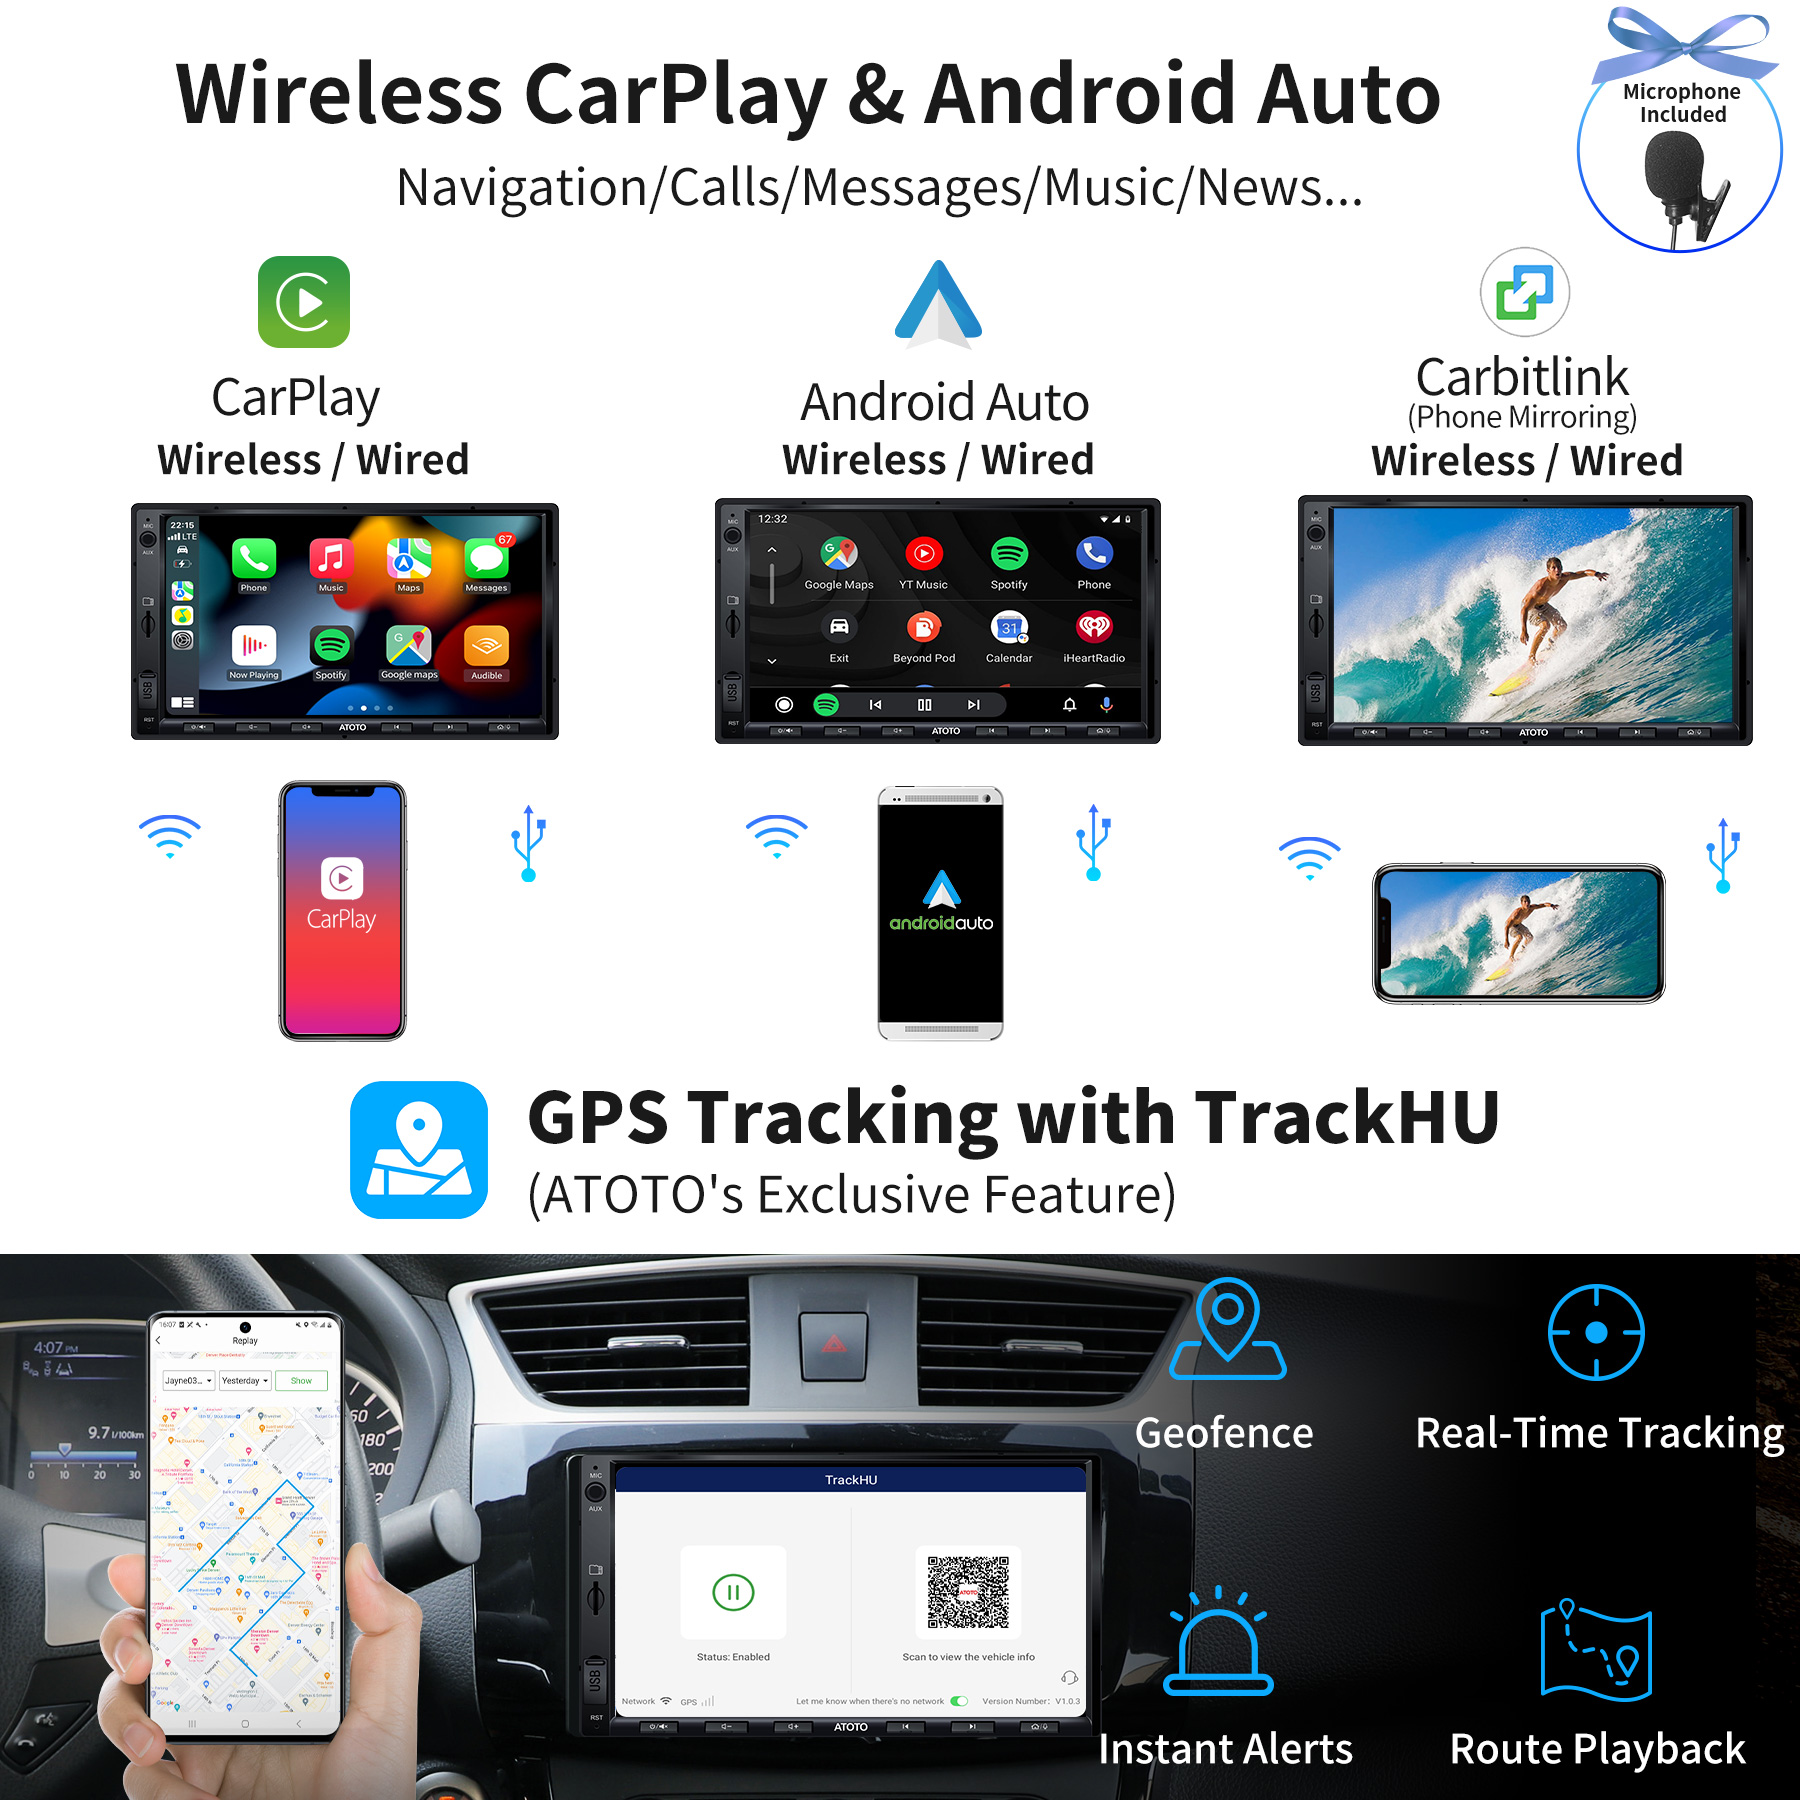  ATOTO S8 Premium 10 inch QLED Double-DIN Android Car Stereo,  in-Dash Video Receiver, Wireless CarPlay & Wireless Android Auto, 3G+32G,  2BT w/aptX HD, USB Tethering, HD VSV Parking with LRV,S8G2114PM 